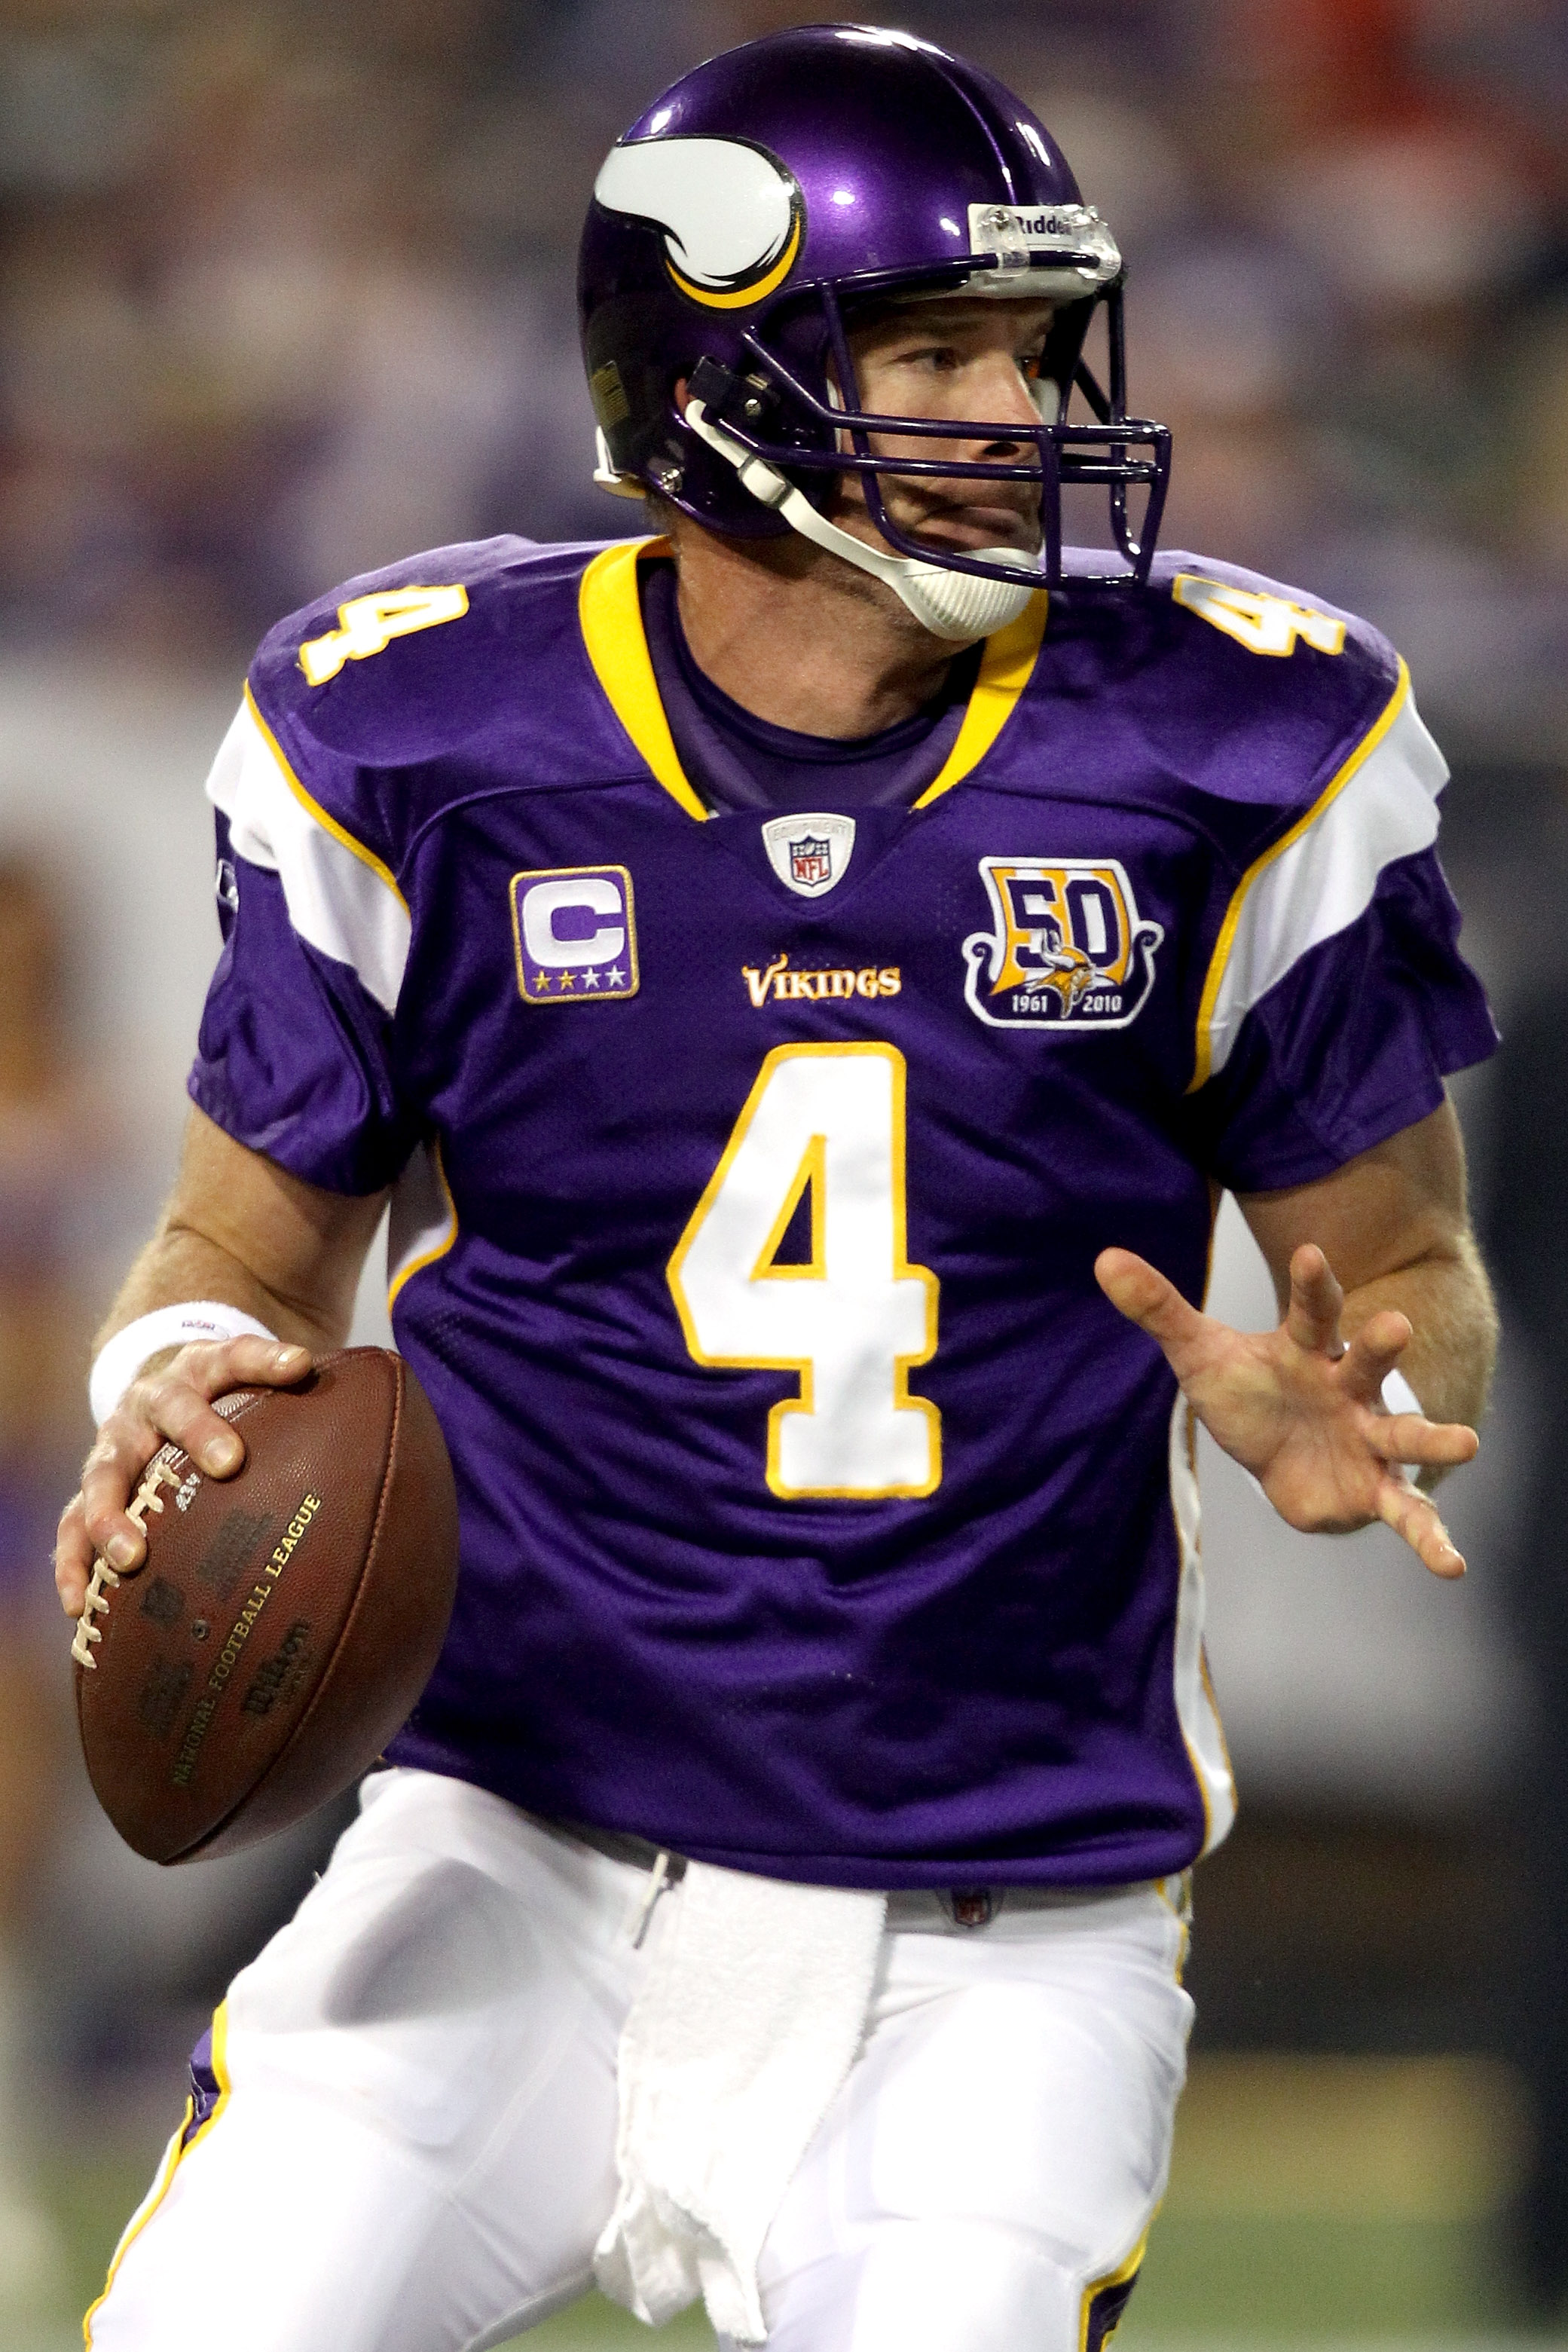 MINNEAPOLIS - NOVEMBER 21:  Quarterback Brett Favre #4 of the Minnesota Vikings looks for an open receiver while playing the Green Bay Packers at the Hubert H. Humphrey Metrodome on November 21, 2010 in Minneapolis, Minnesota.  (Photo by Matthew Stockman/